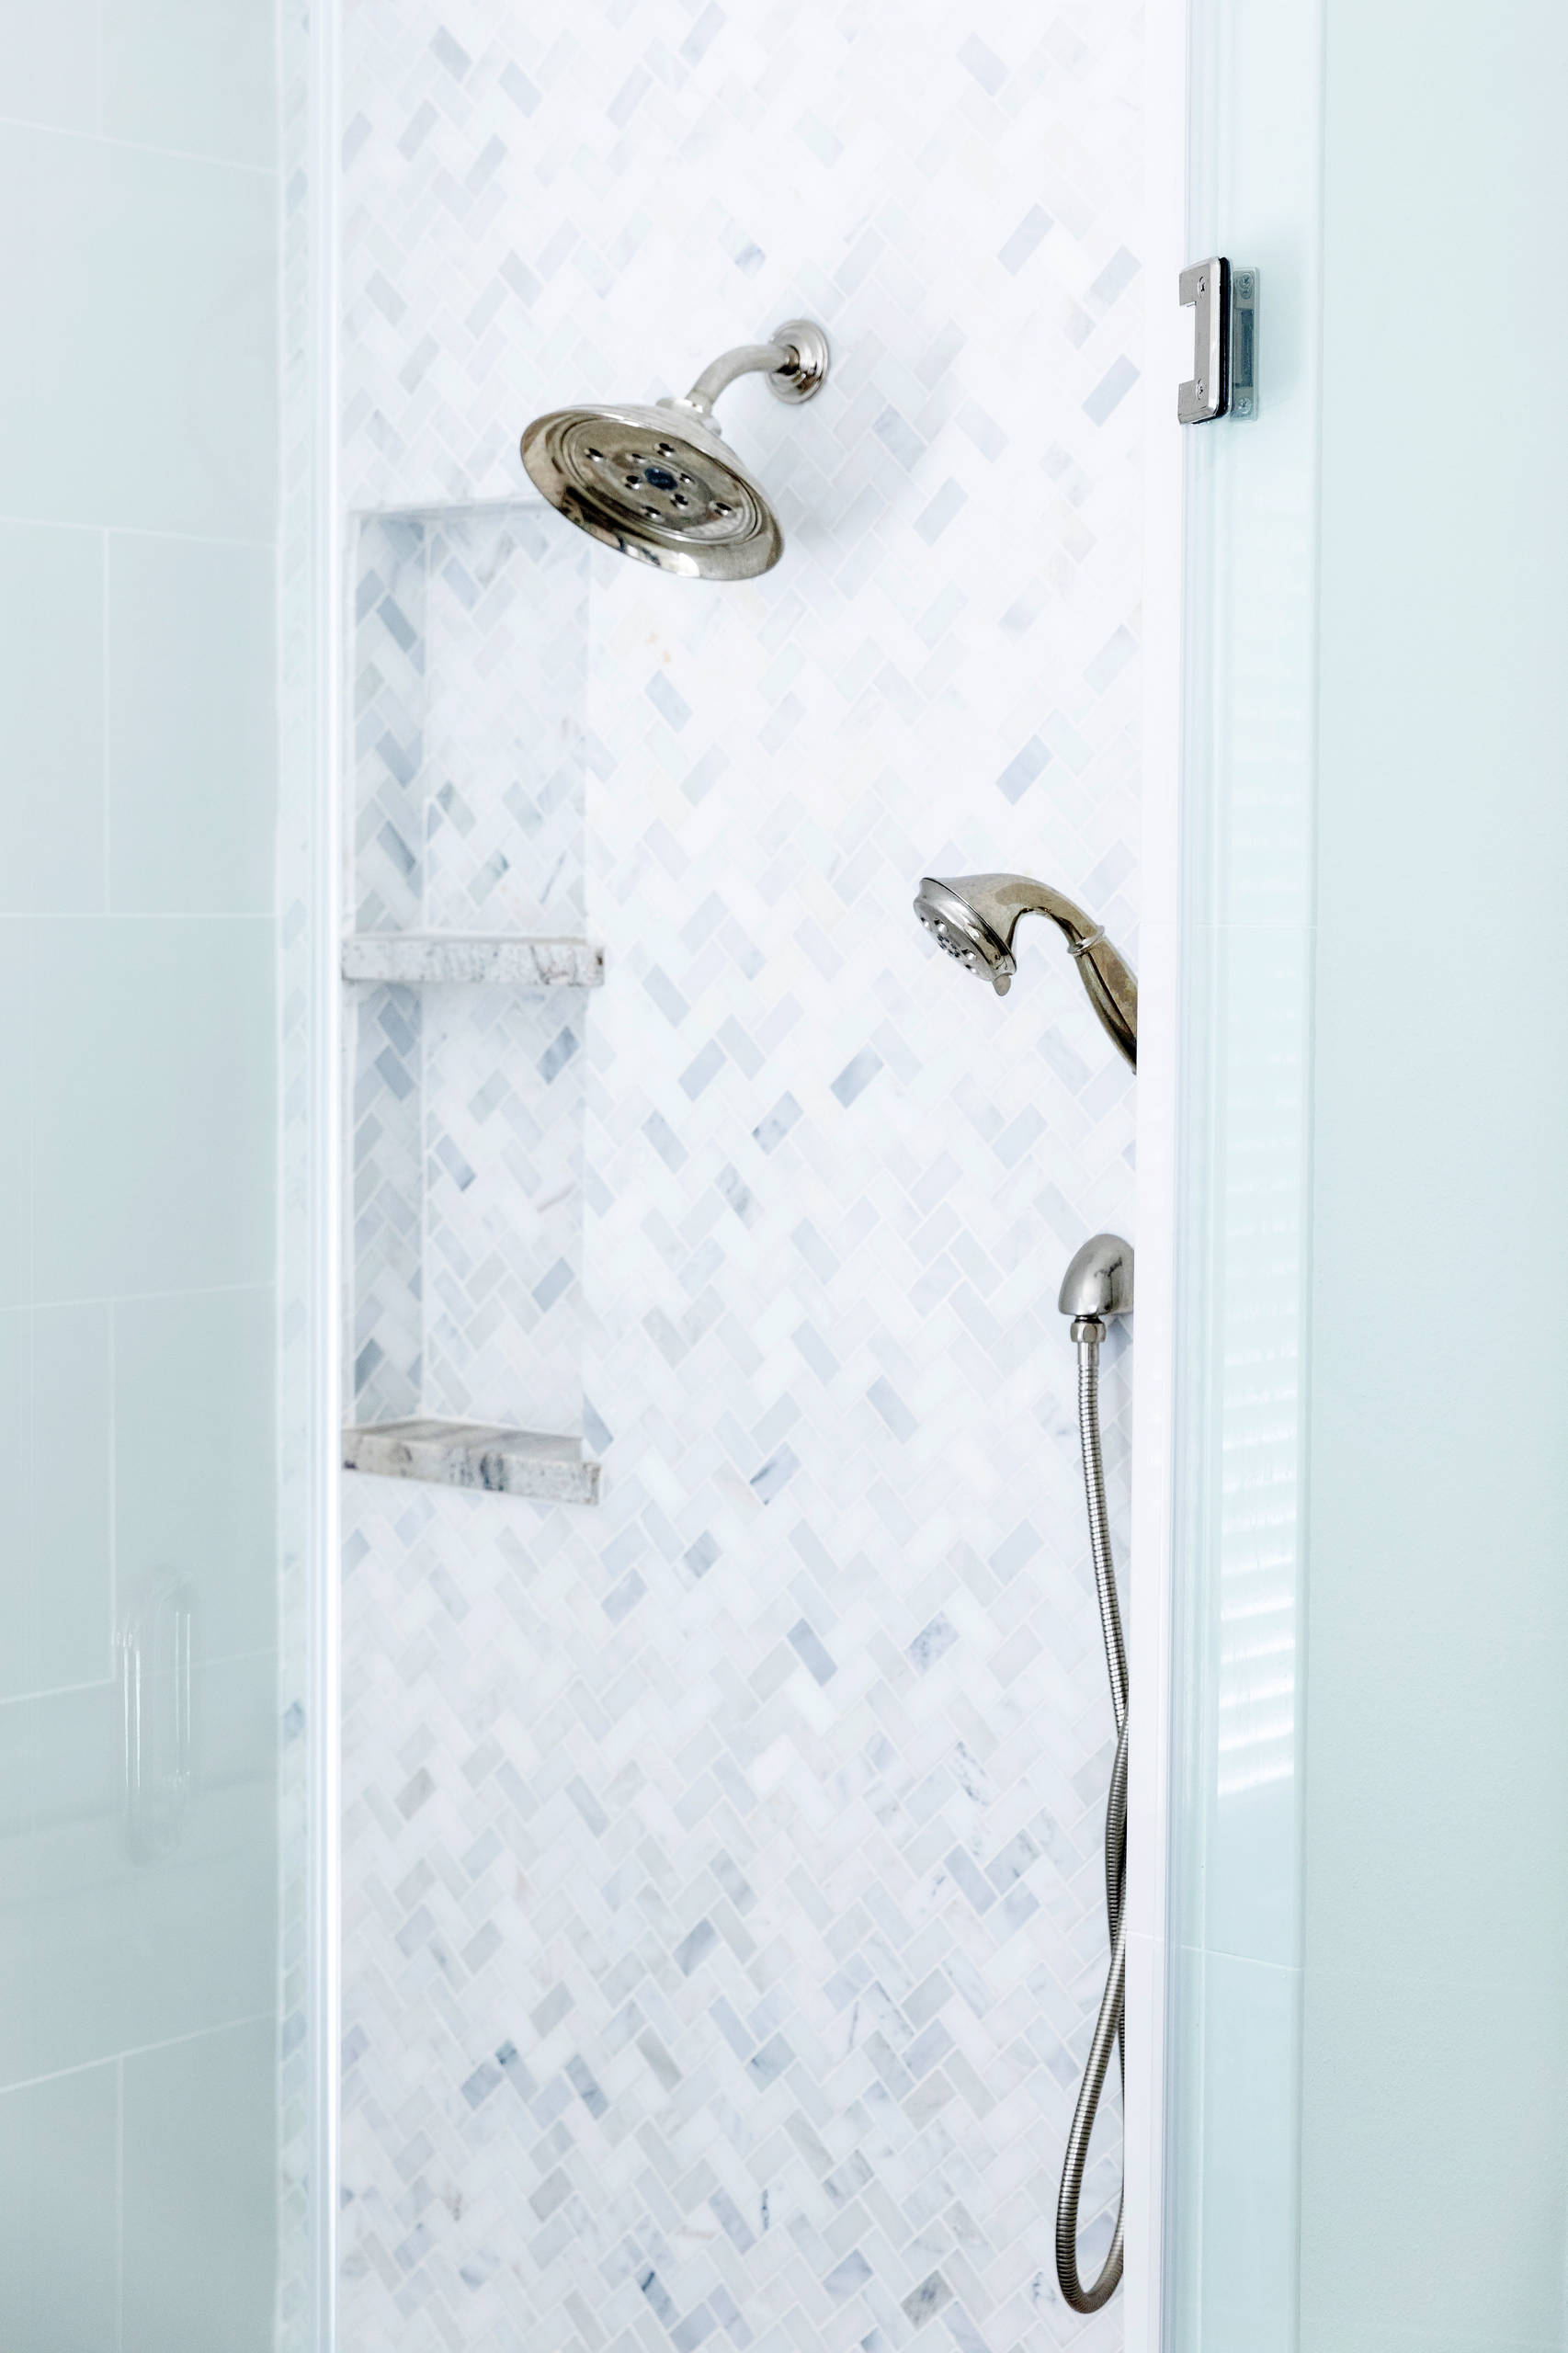 Entrance to shower. Chrome shower head. Floor to ceiling tile. Space Planning by Ourso Designs. Photo by Collin Richie (Collin Richie Photography).